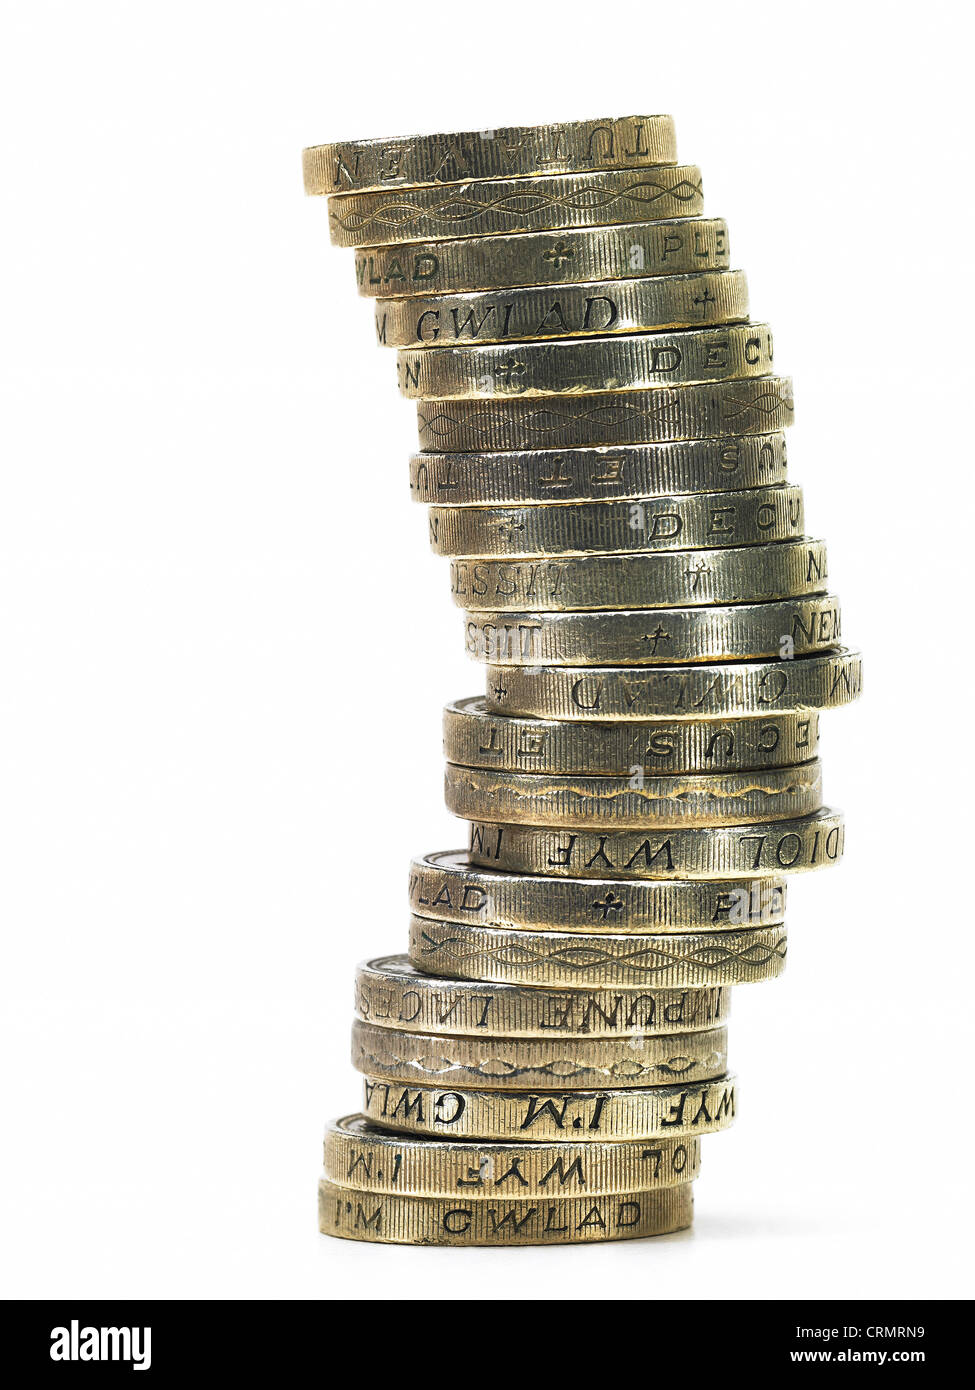 A pile of British pound coins Stock Photo